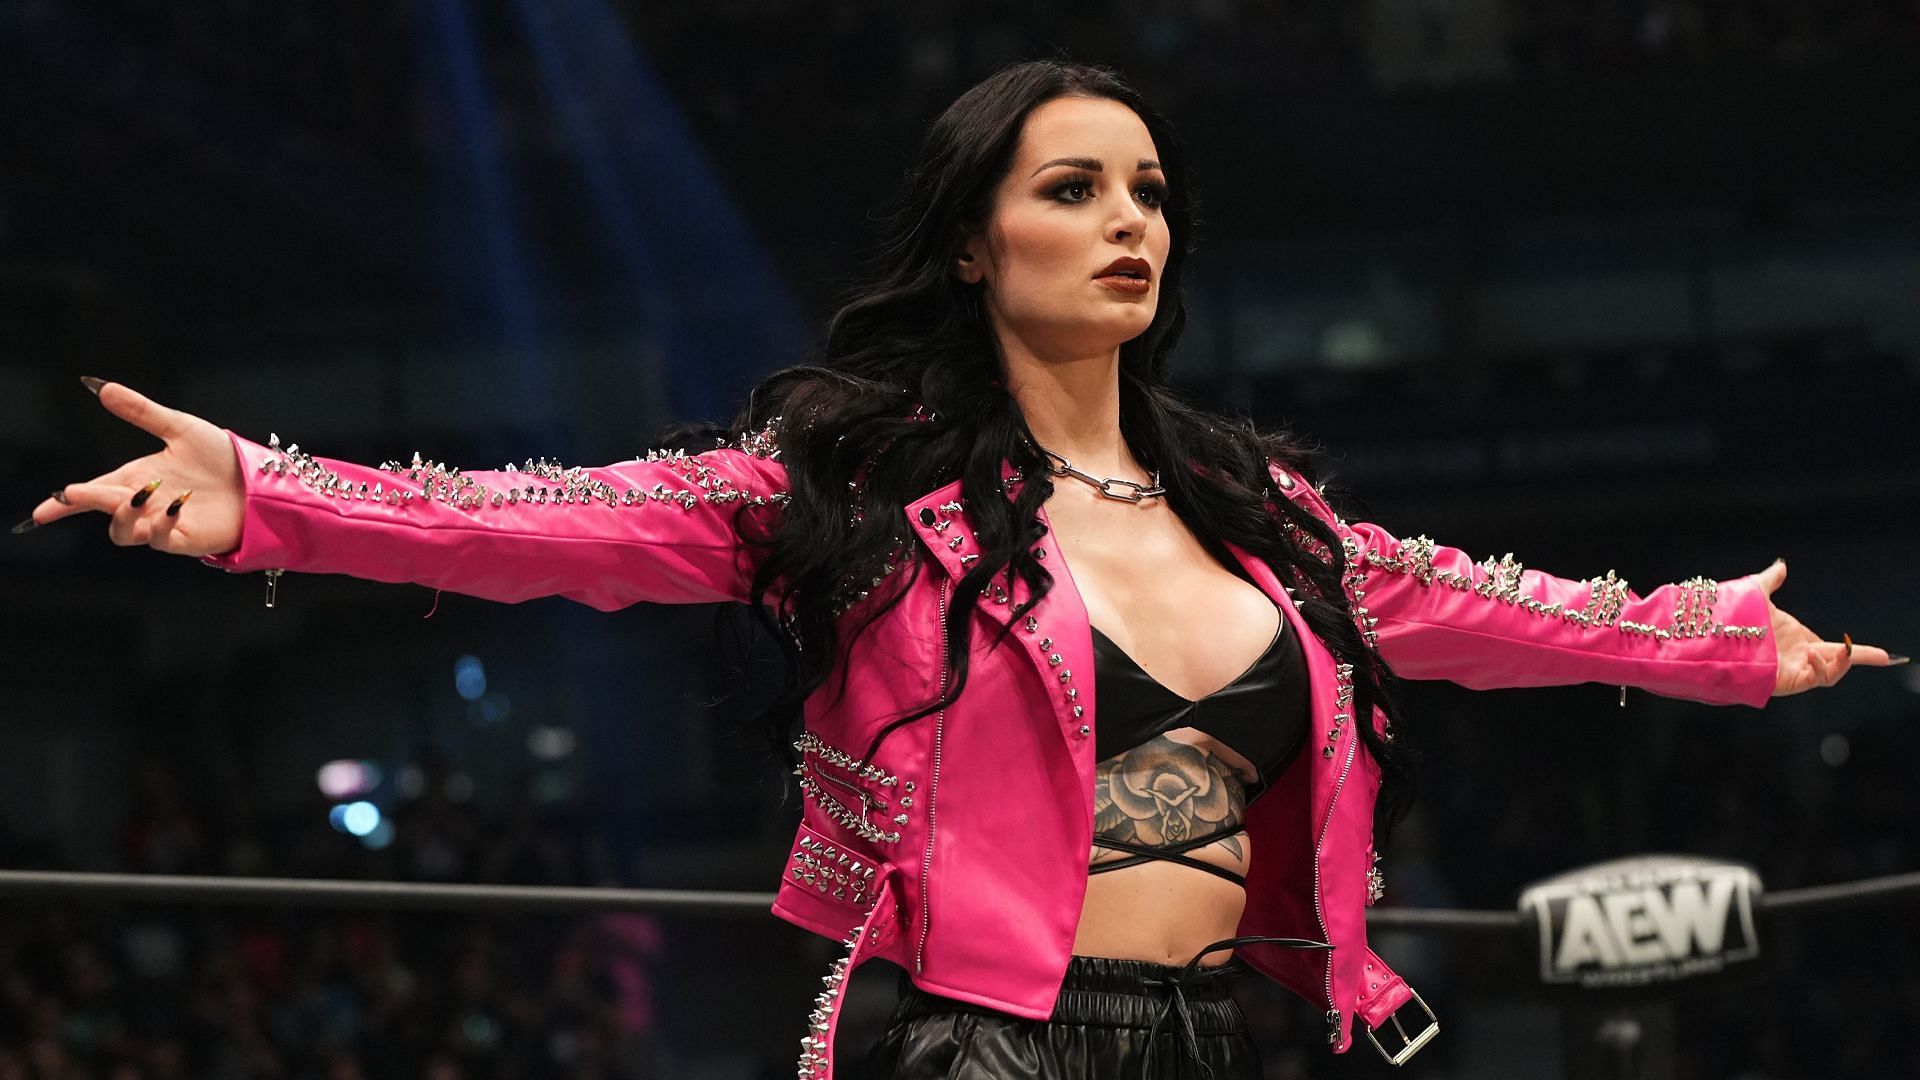 The former Paige poses in the ring (image credit: All Elite Wrestling)